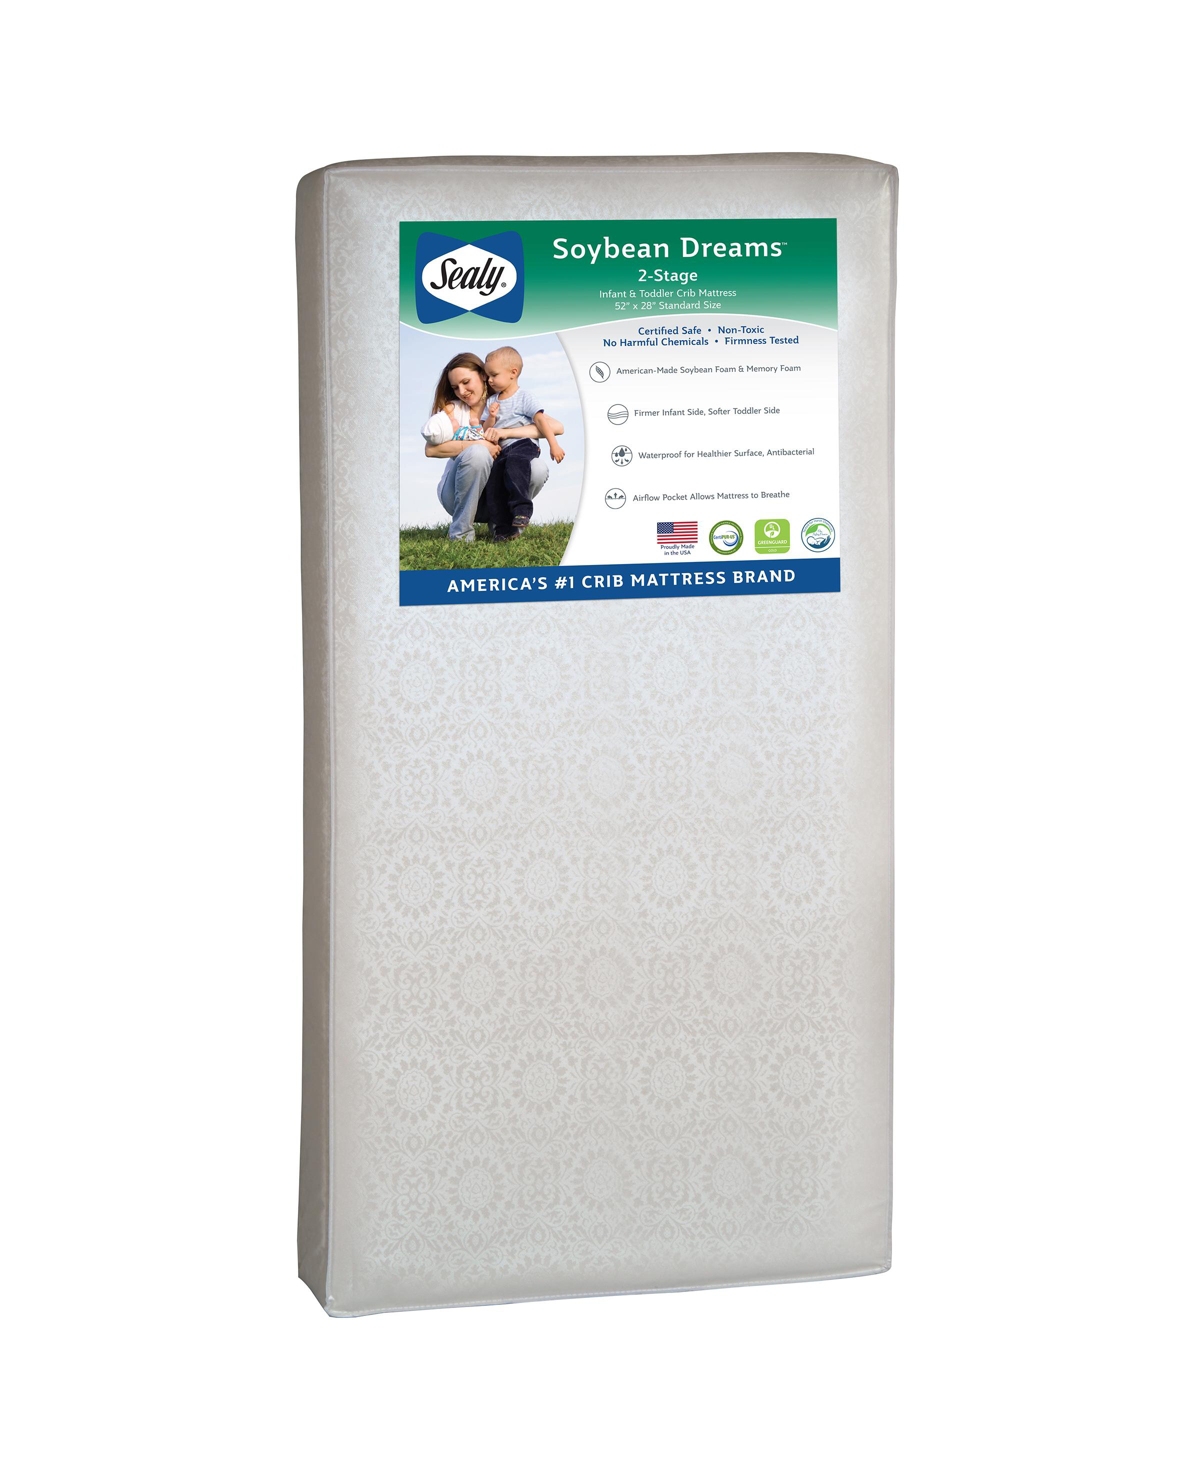 UPC 031878262580 product image for Sealy Soybean Dreams 2-Stage Crib Mattress | upcitemdb.com